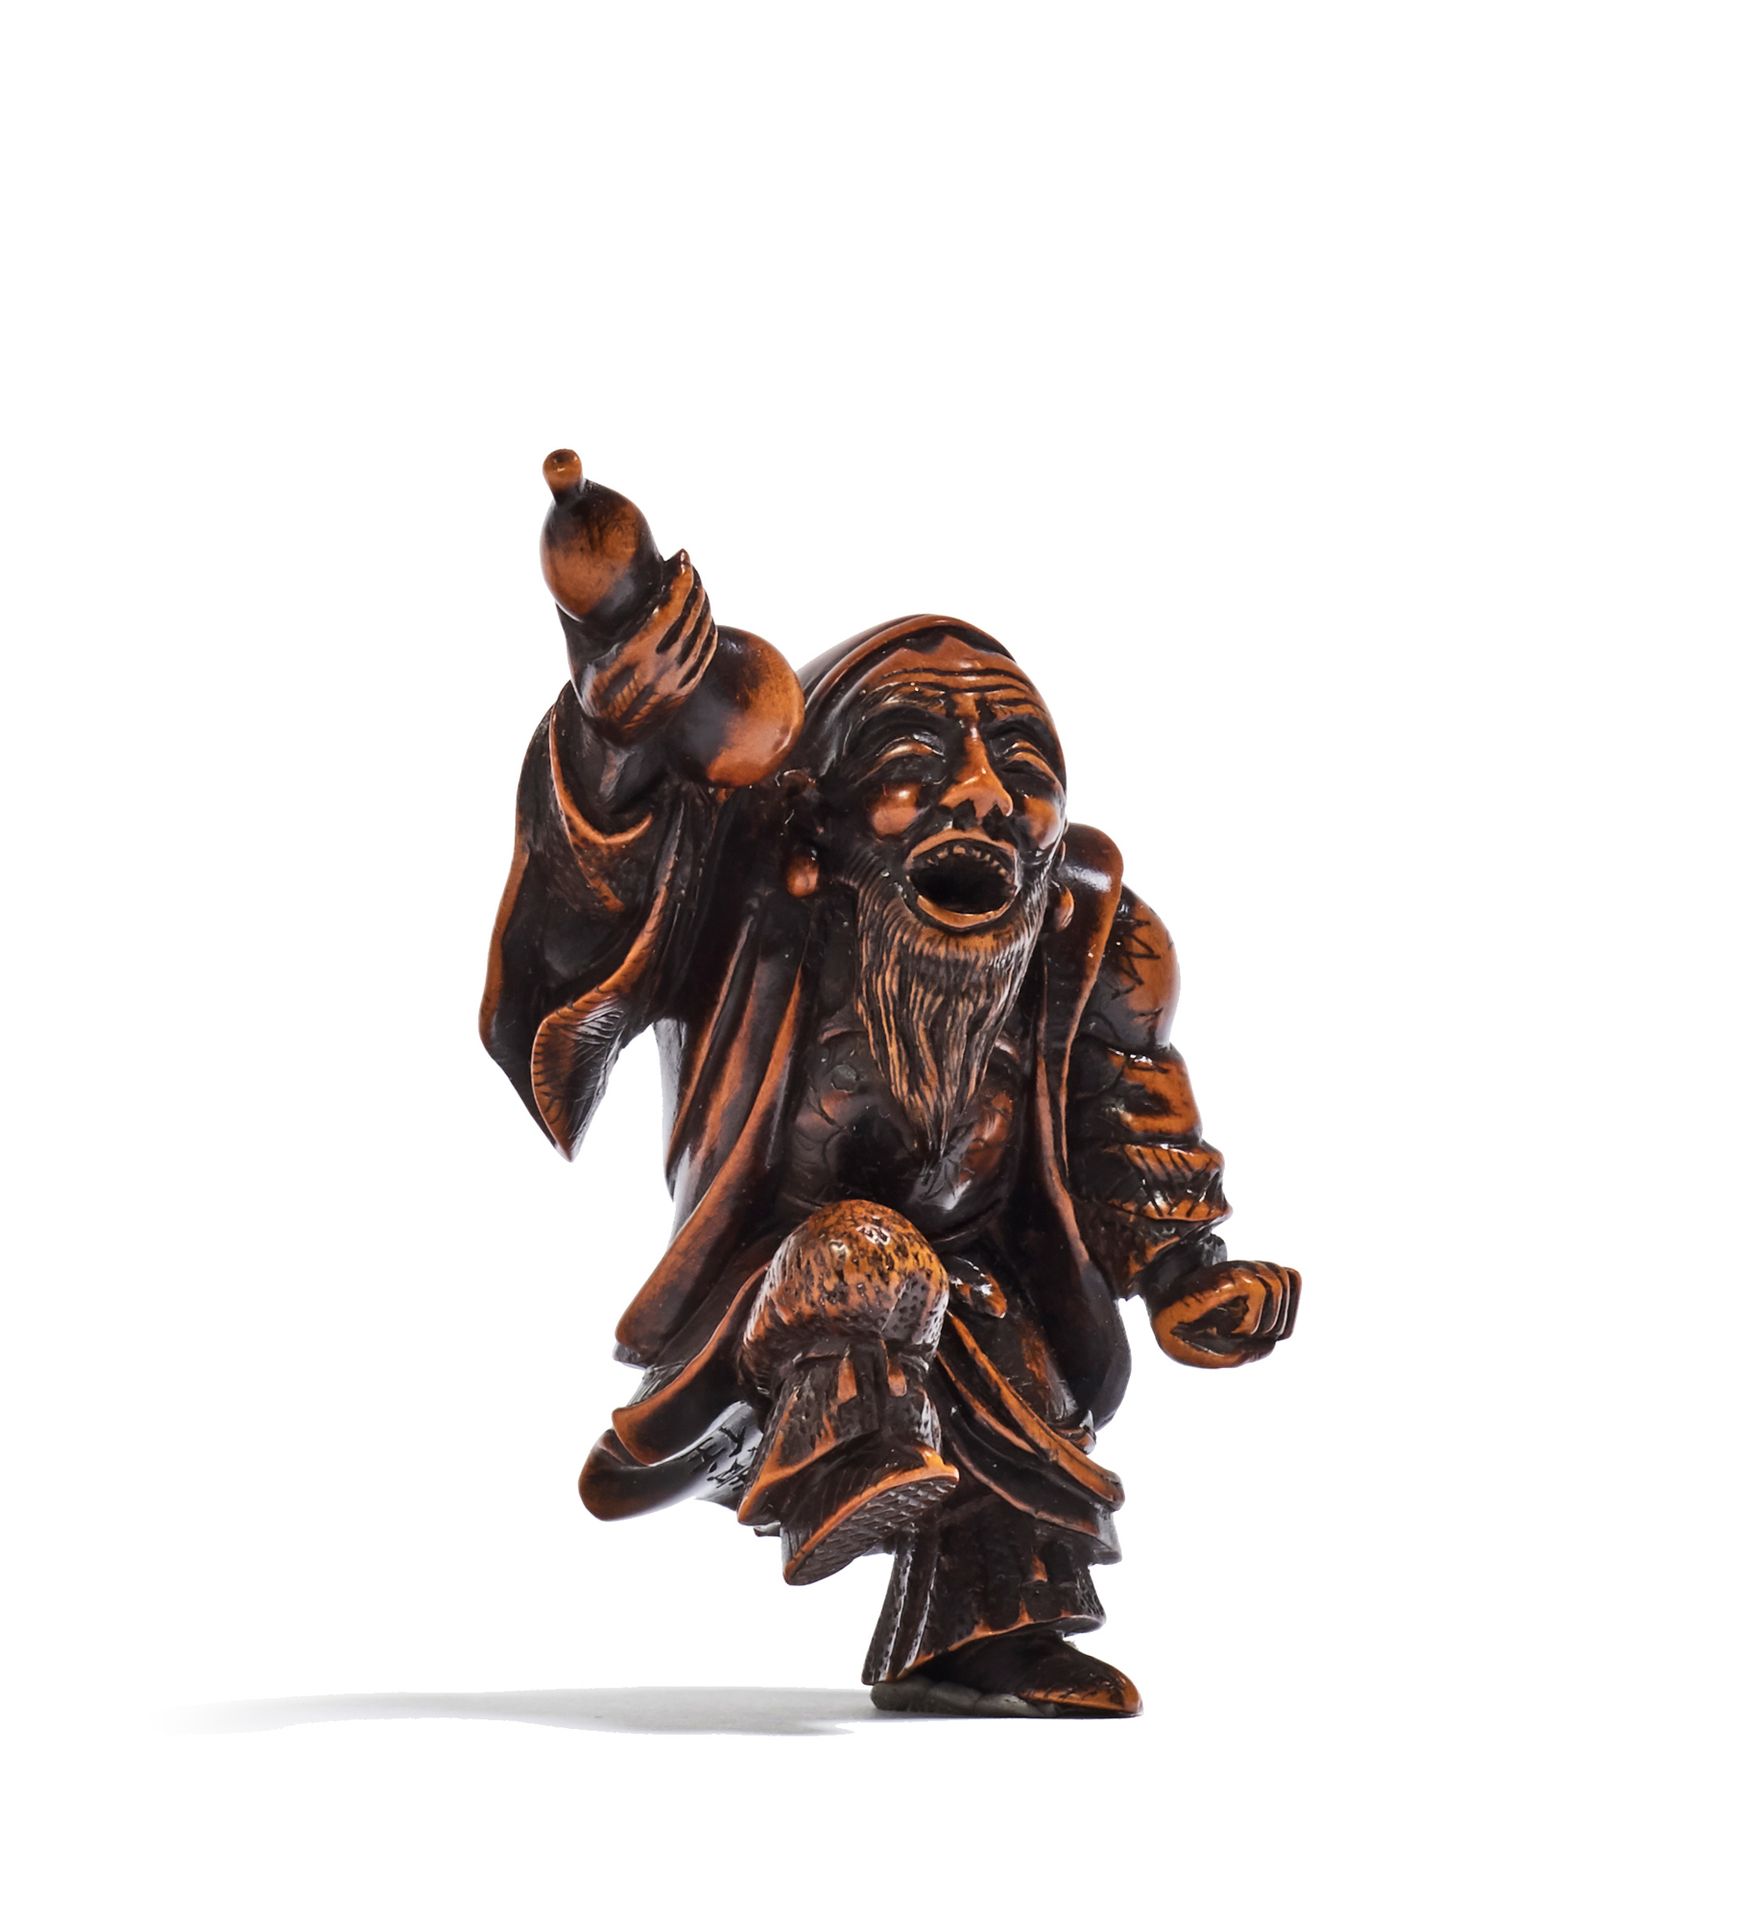 JAPON - XIXE SIÈCLE Wooden netsuke, Daikoku standing, singing and dancing on one&hellip;